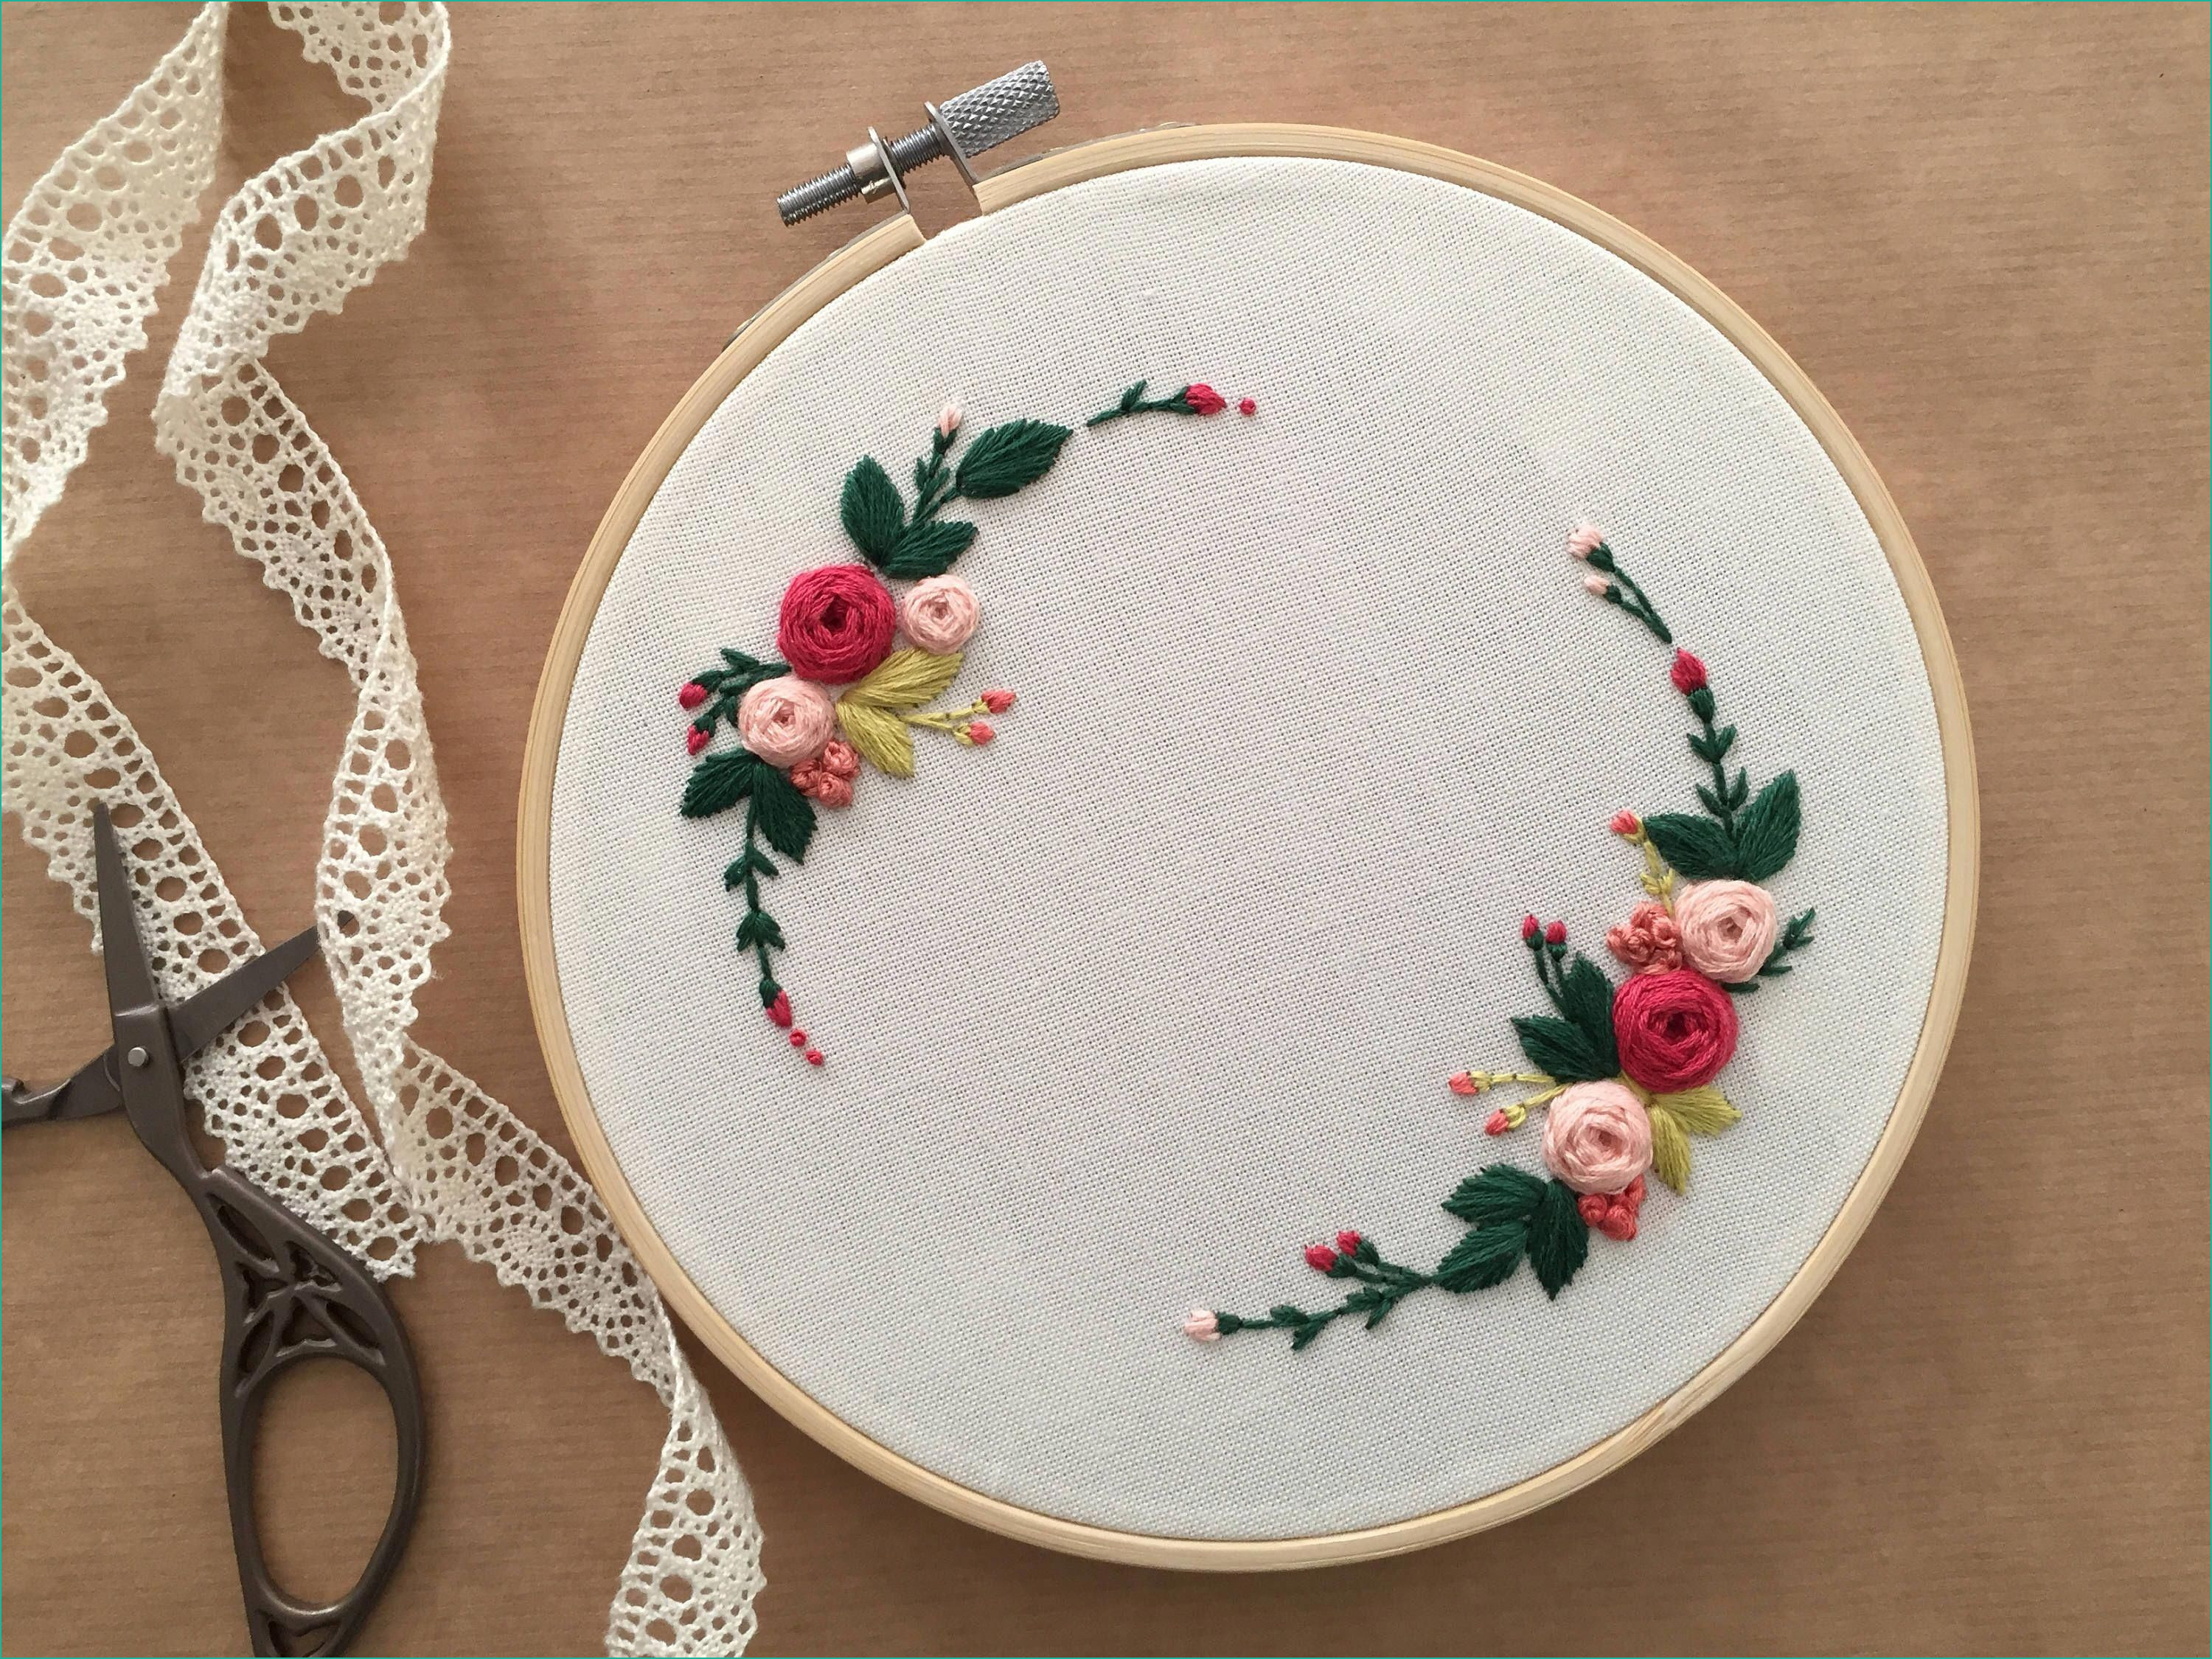 Hand Embroidery Letters Patterns Free Hand Embroidery Letters Patterns Free Fresh 79 O Handembroidery